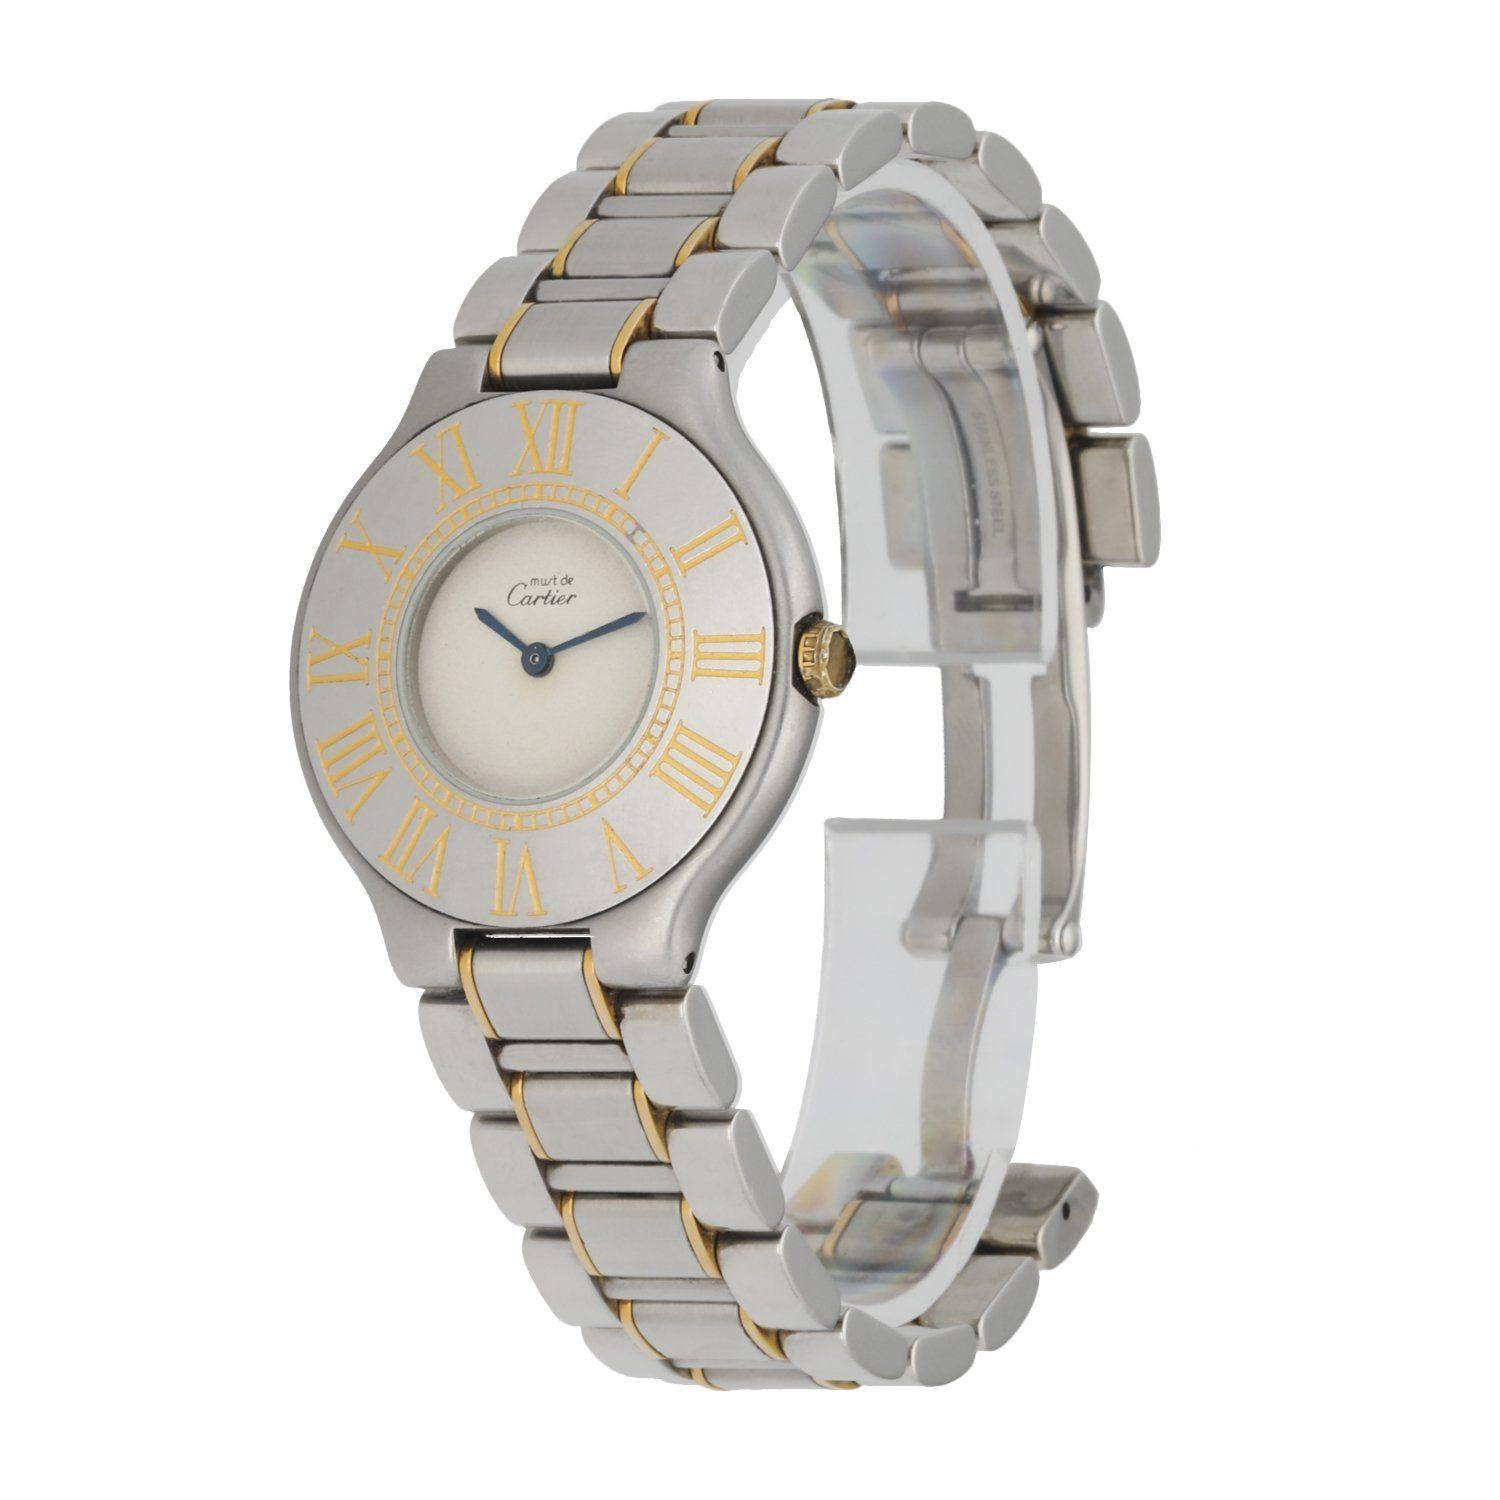 Cartier Must de 21 Ladies Watch. 30mm Stainless Steel case. Stainless Steel Stationary bezel with golden tone Roman numeral hour marker engraved. Minute markers engraved on the inner bezel. Silver dial with blue steel hands. Two tone, stainless